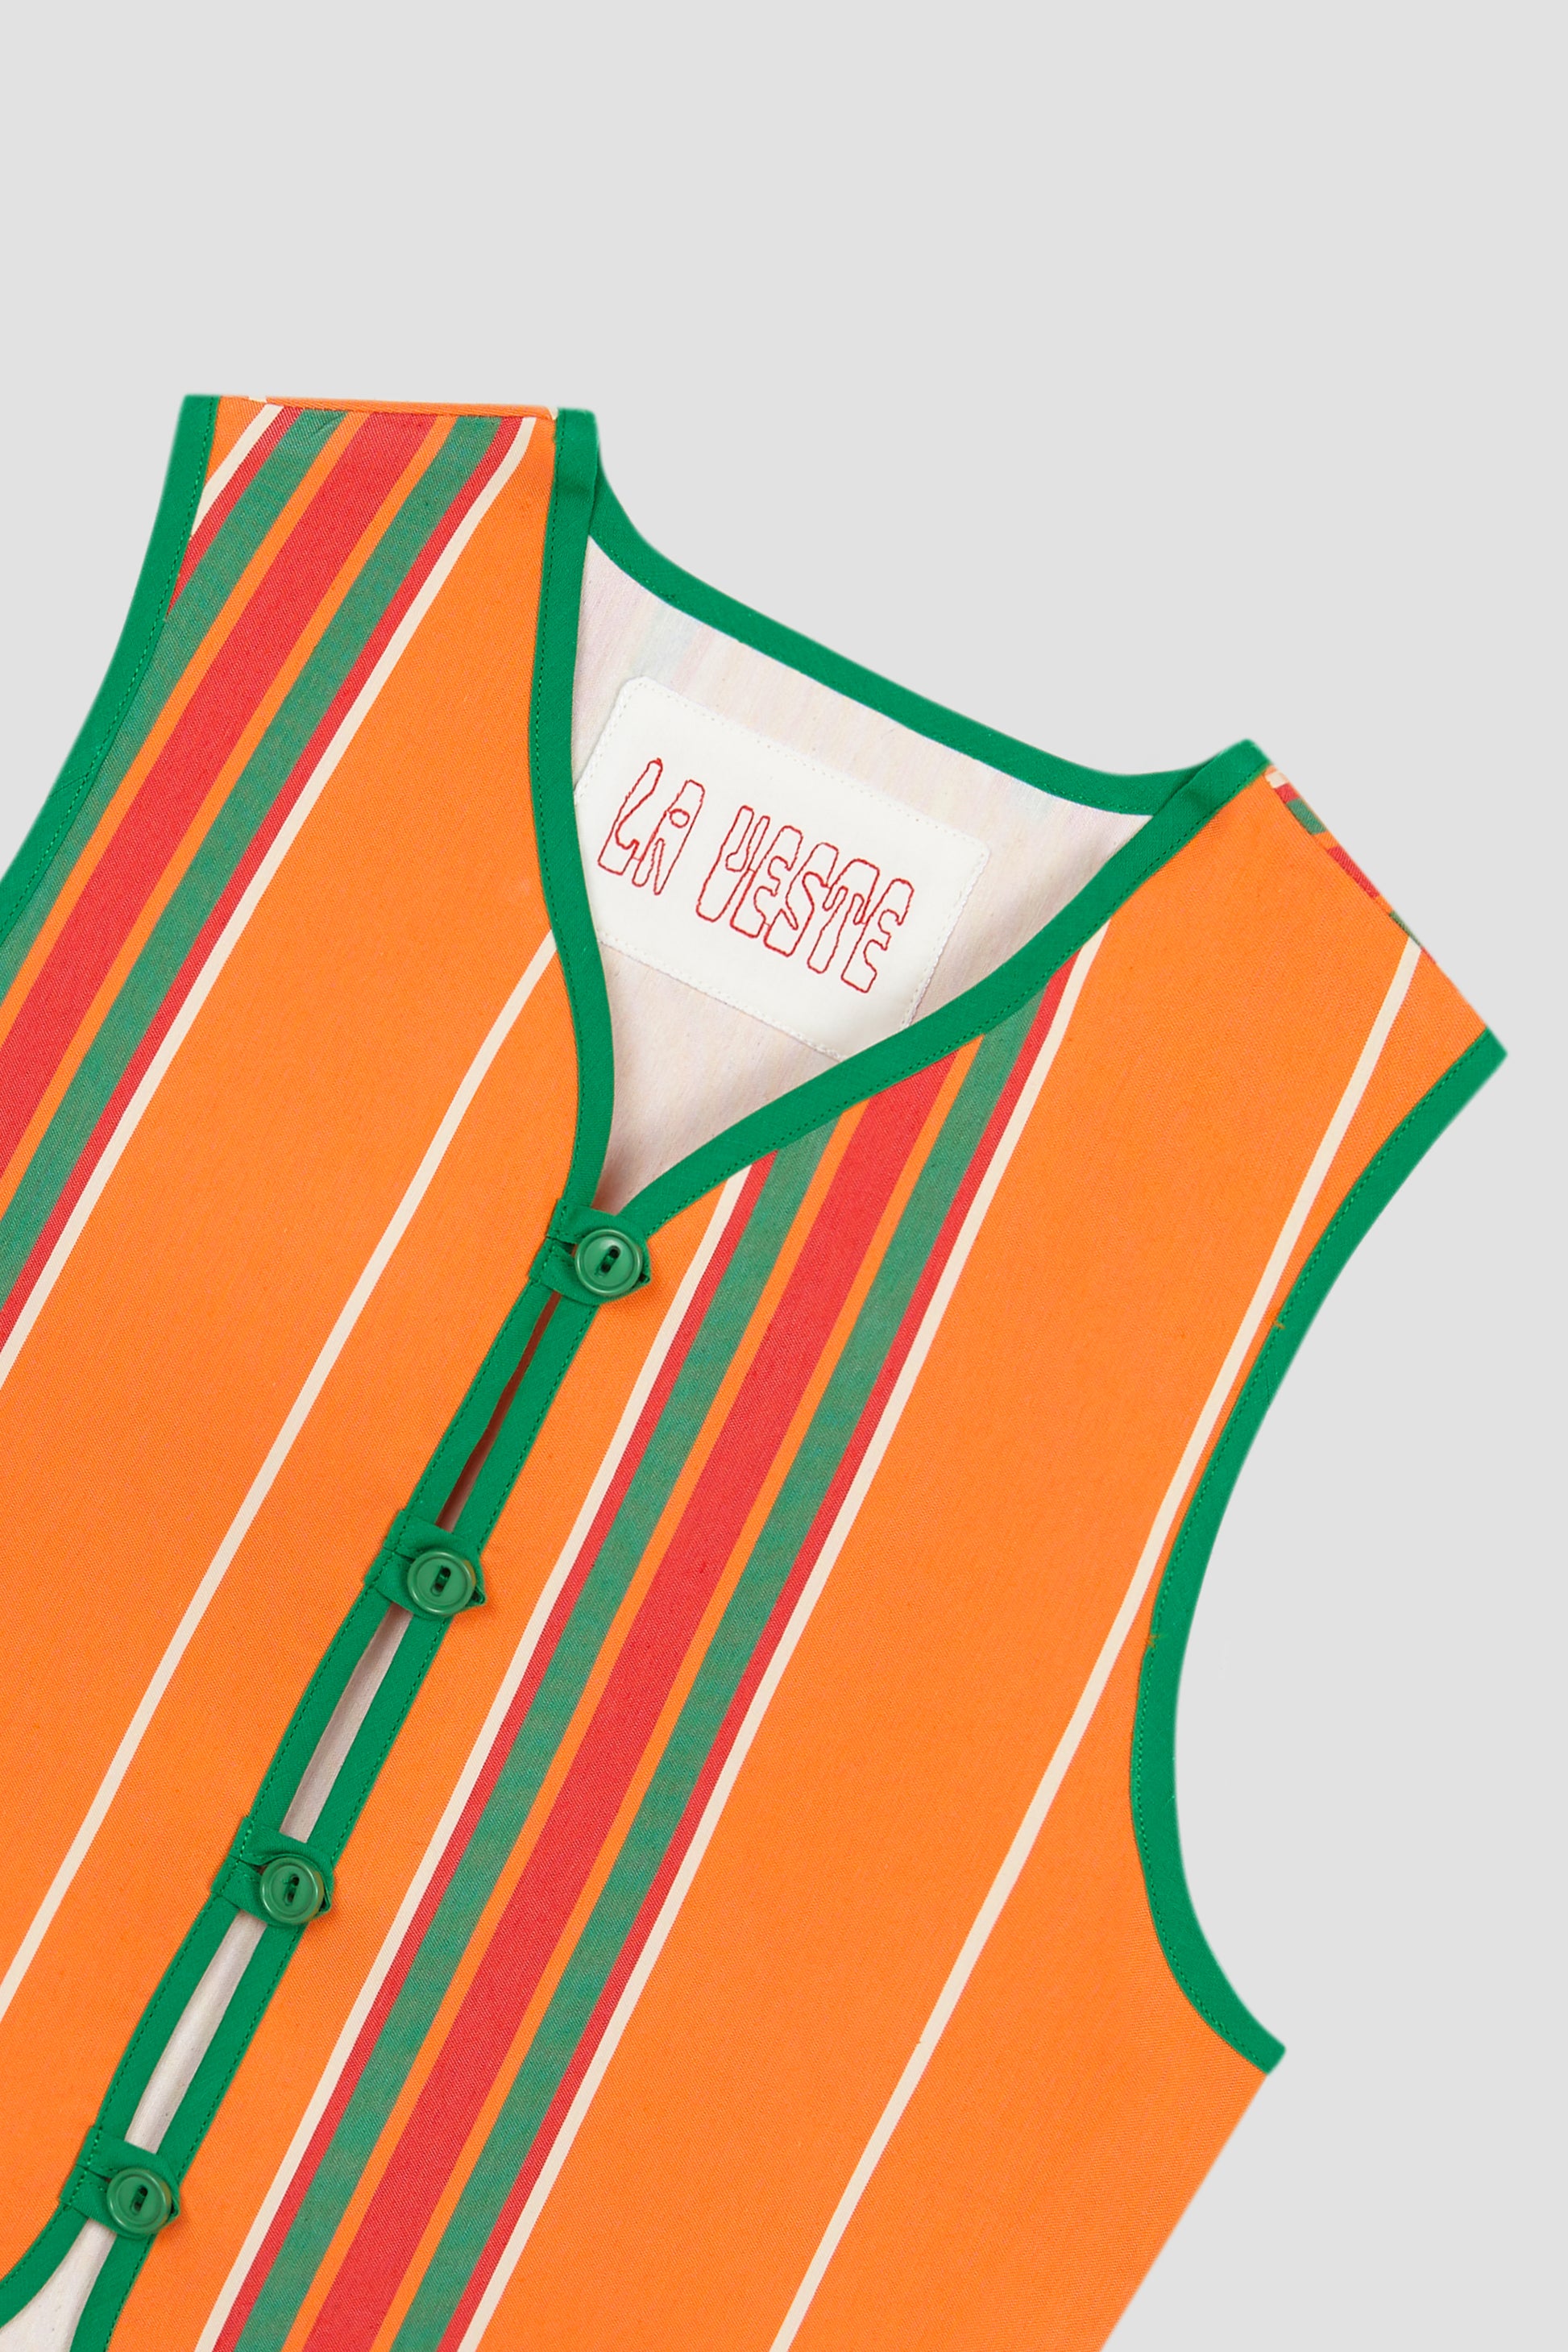 Orange cotton waistcoat with red and green stripes and green bias binding.